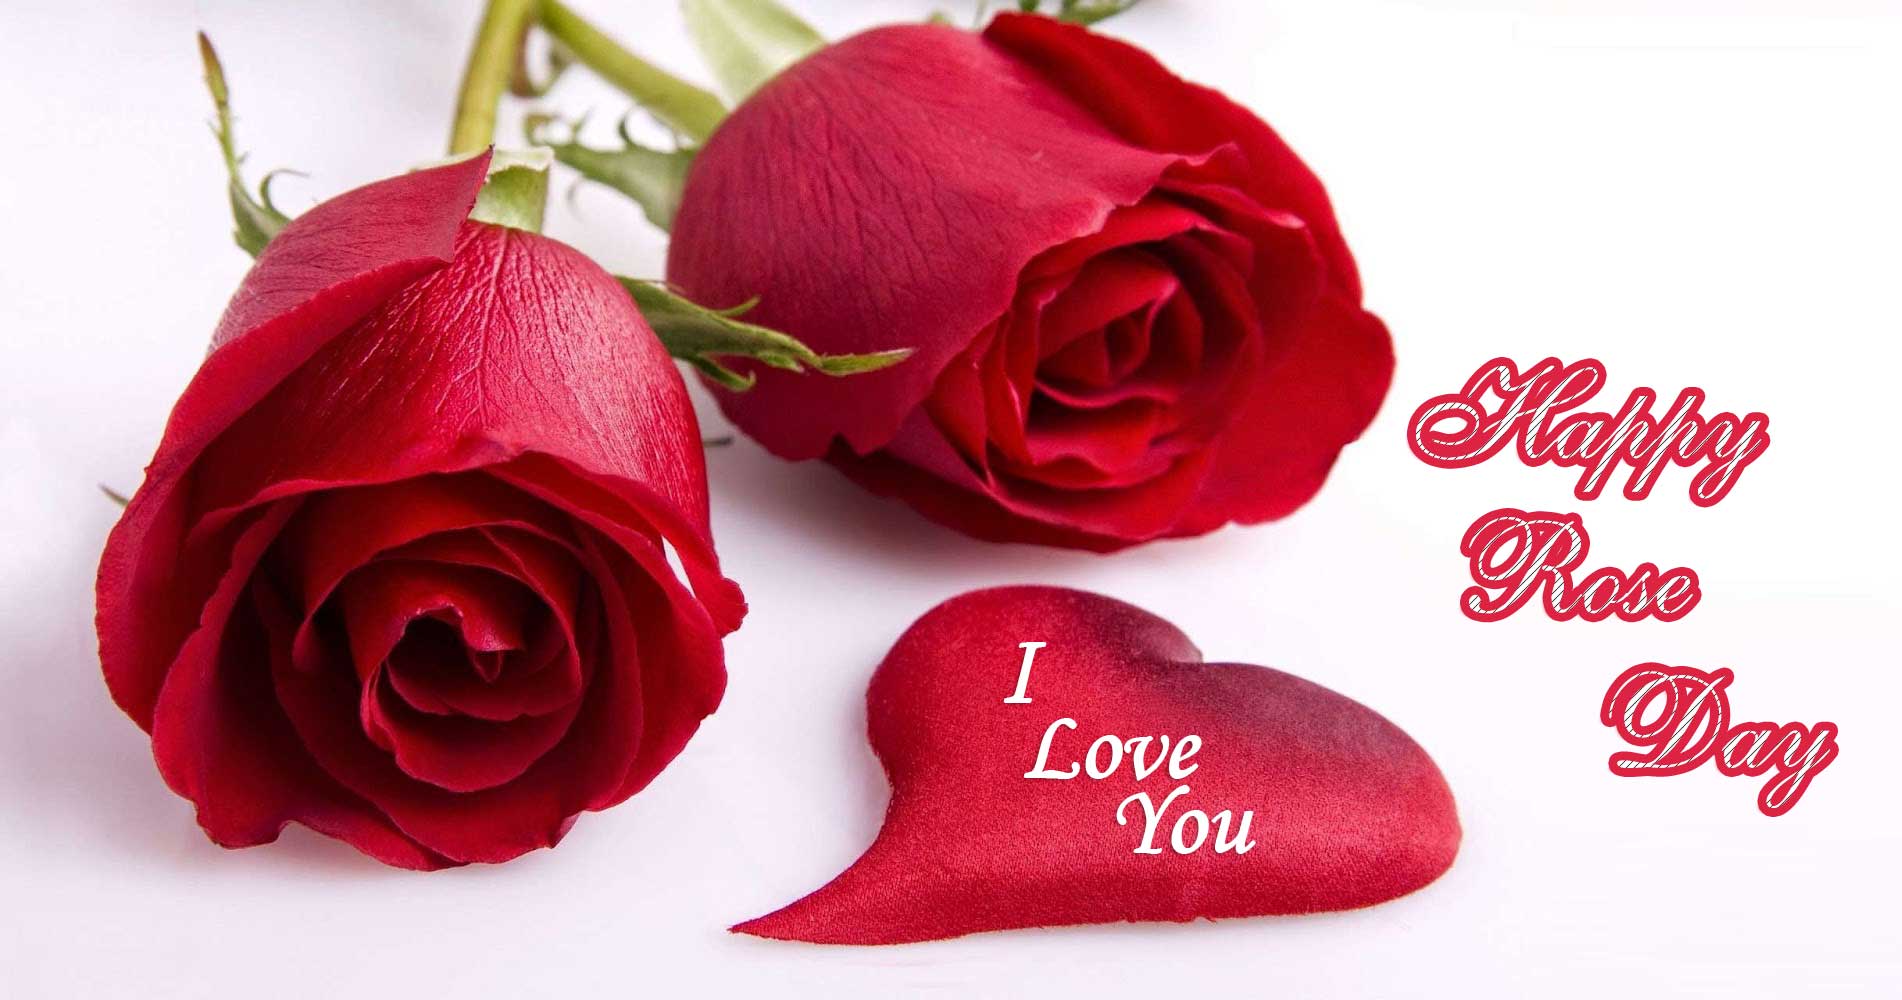 Happy Rose Day Messages for Lover